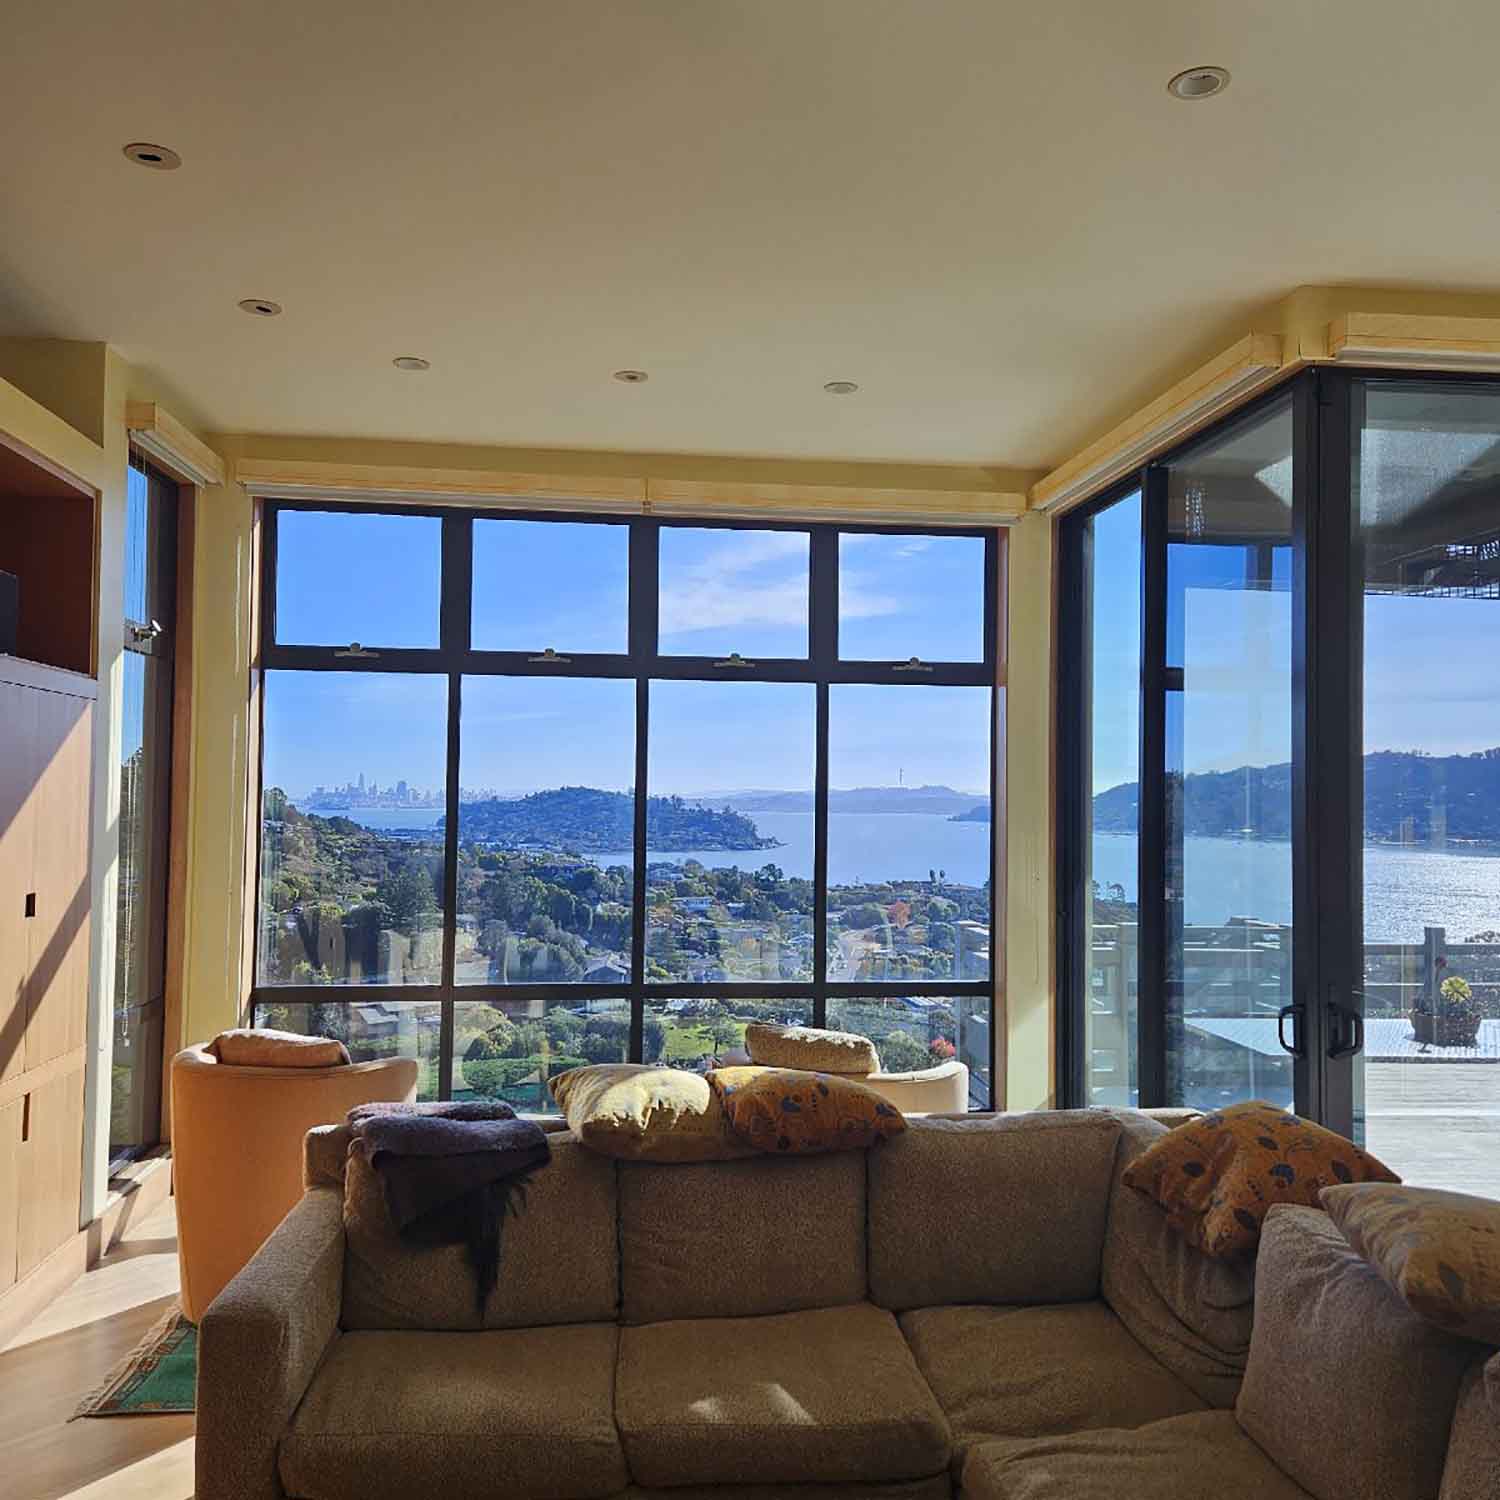 Before and After: Sun Control Window Film iFor A Tiburon, CA Home